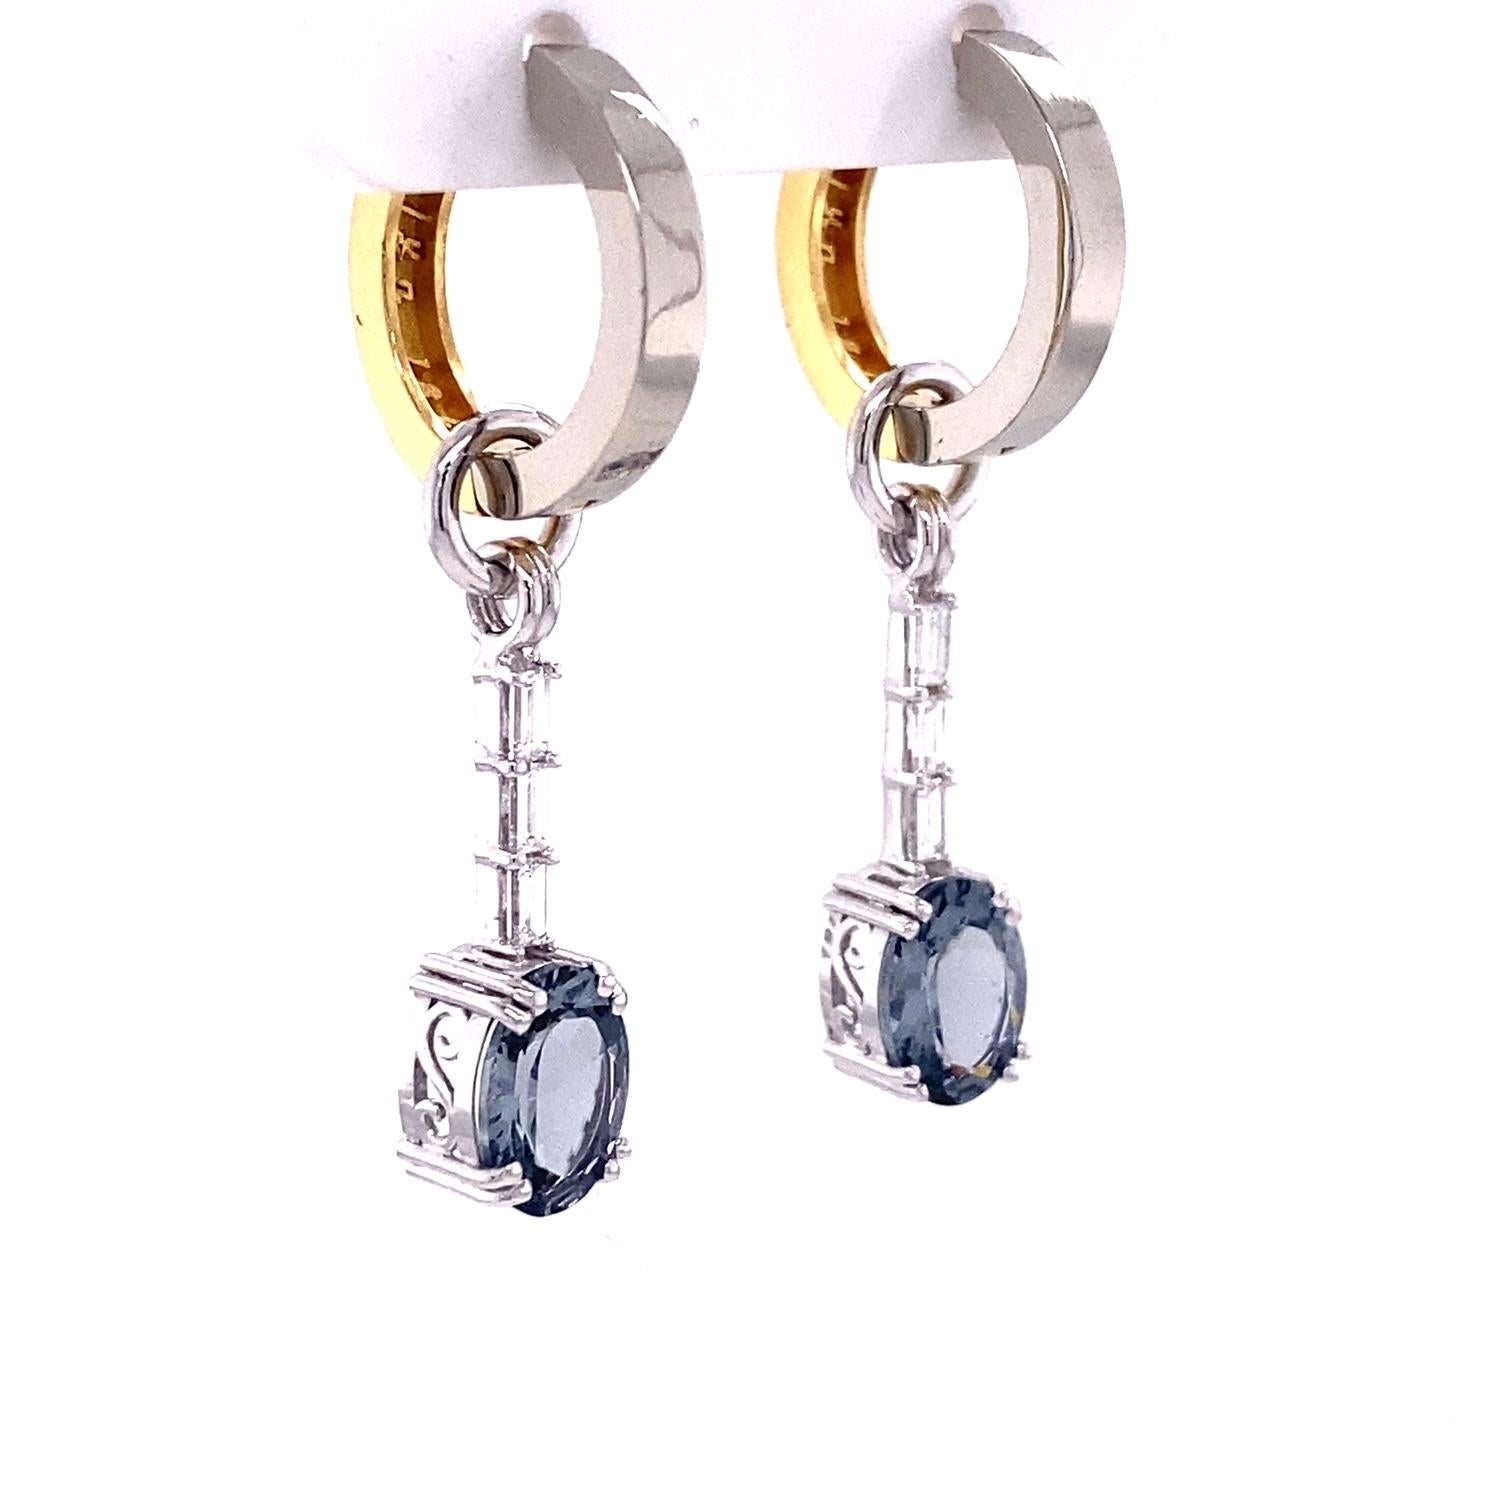 A pair of 18k white gold jackets set with 2.38 carats of oval gray spinel and 6 baguette diamonds, .29 total carat weight on a pair of reversible 18k white and yellow gold huggie hoops. Earrings designed and made by llyn strong.